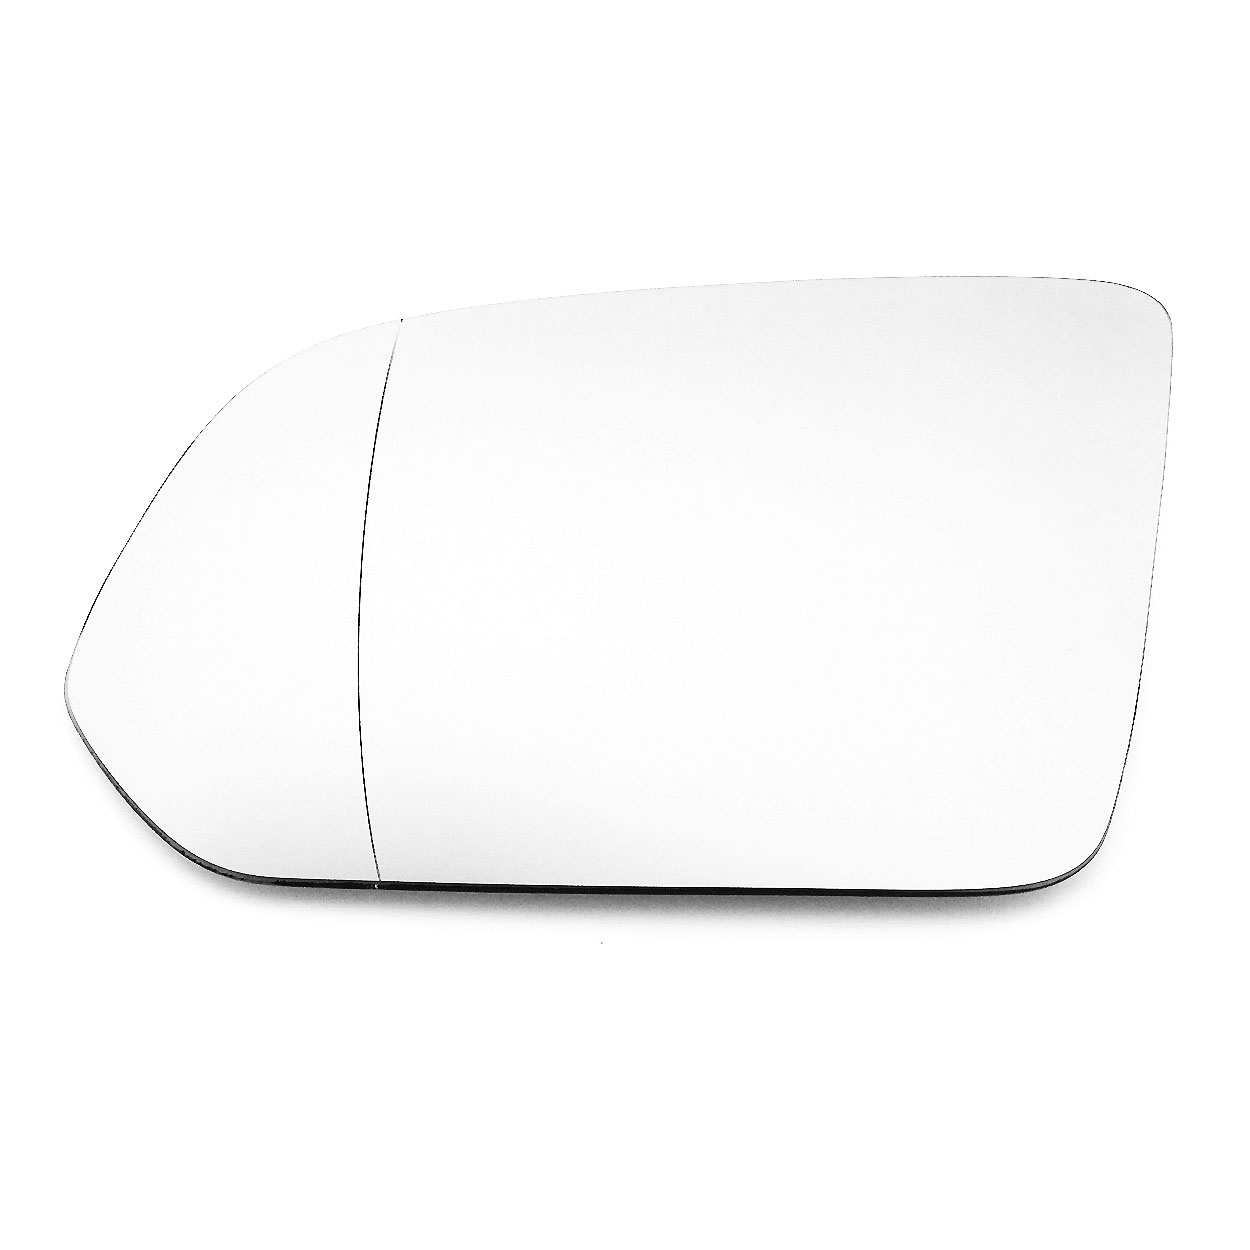 Mercedes Vito Wing Mirror Glass LEFT HAND ( UK Passenger Side ) 2016 to 2020 – Wide Angle Wing Mirror